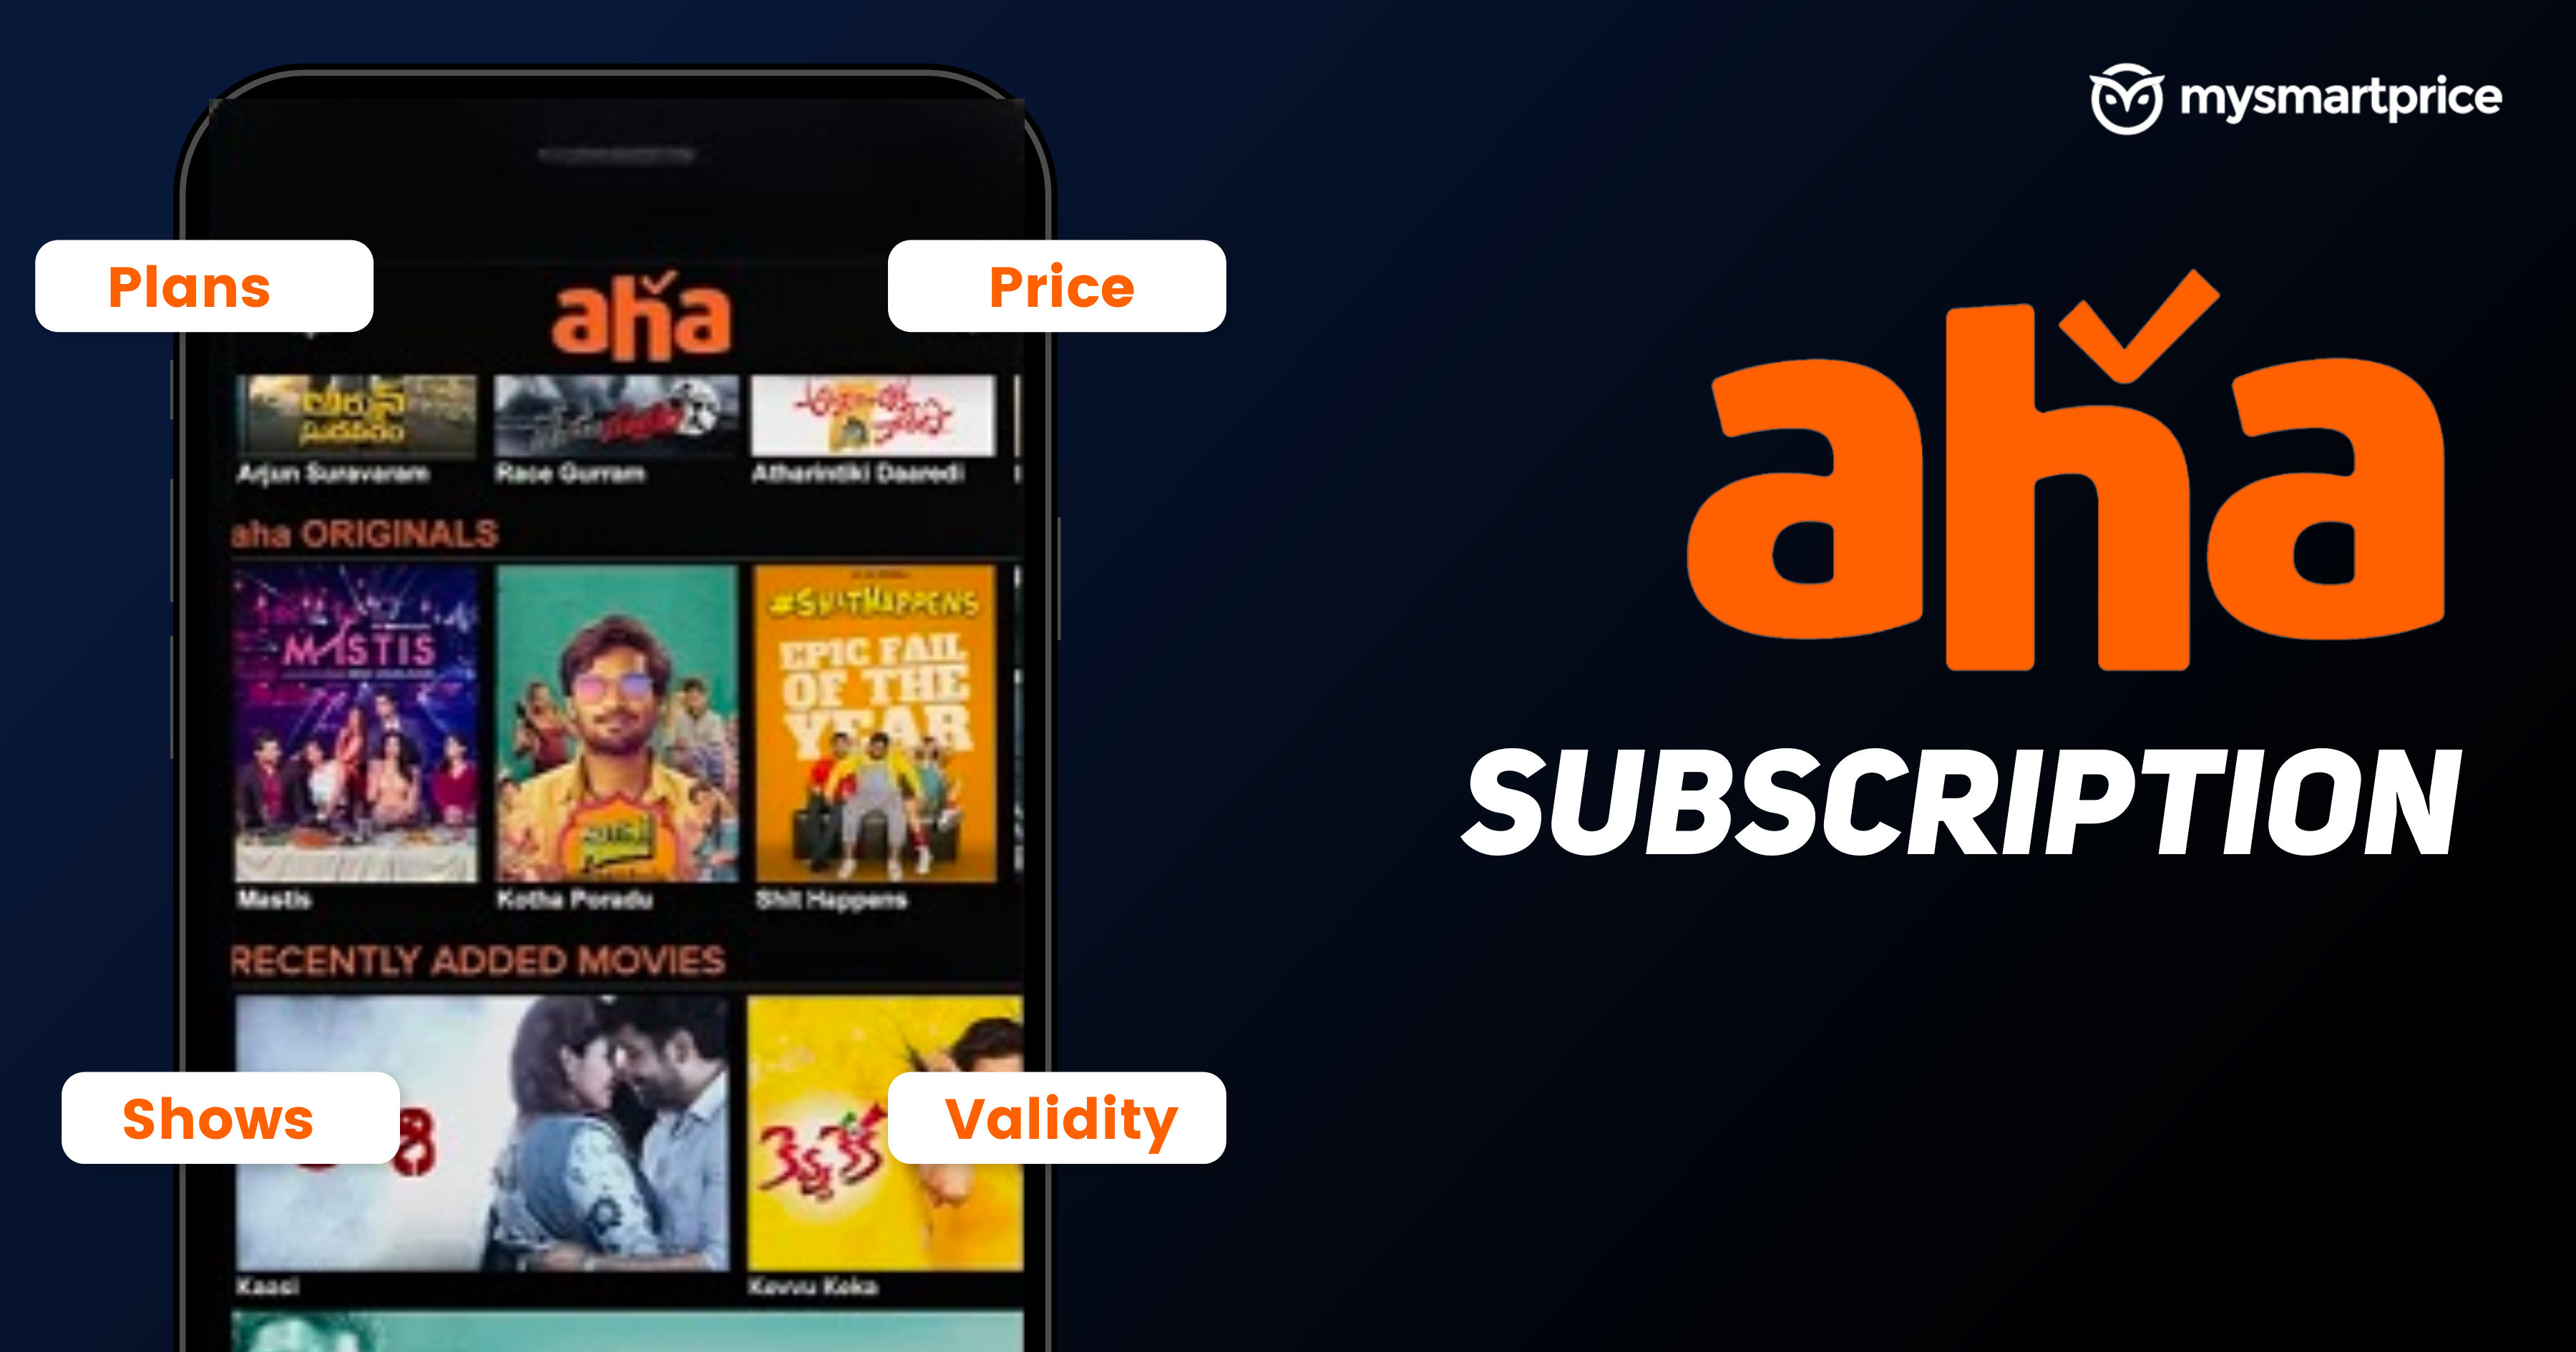 Aha Subscription Plans 2022: Best Aha Membership Plans with Price & Validity Benefits to Watch Best Telugu